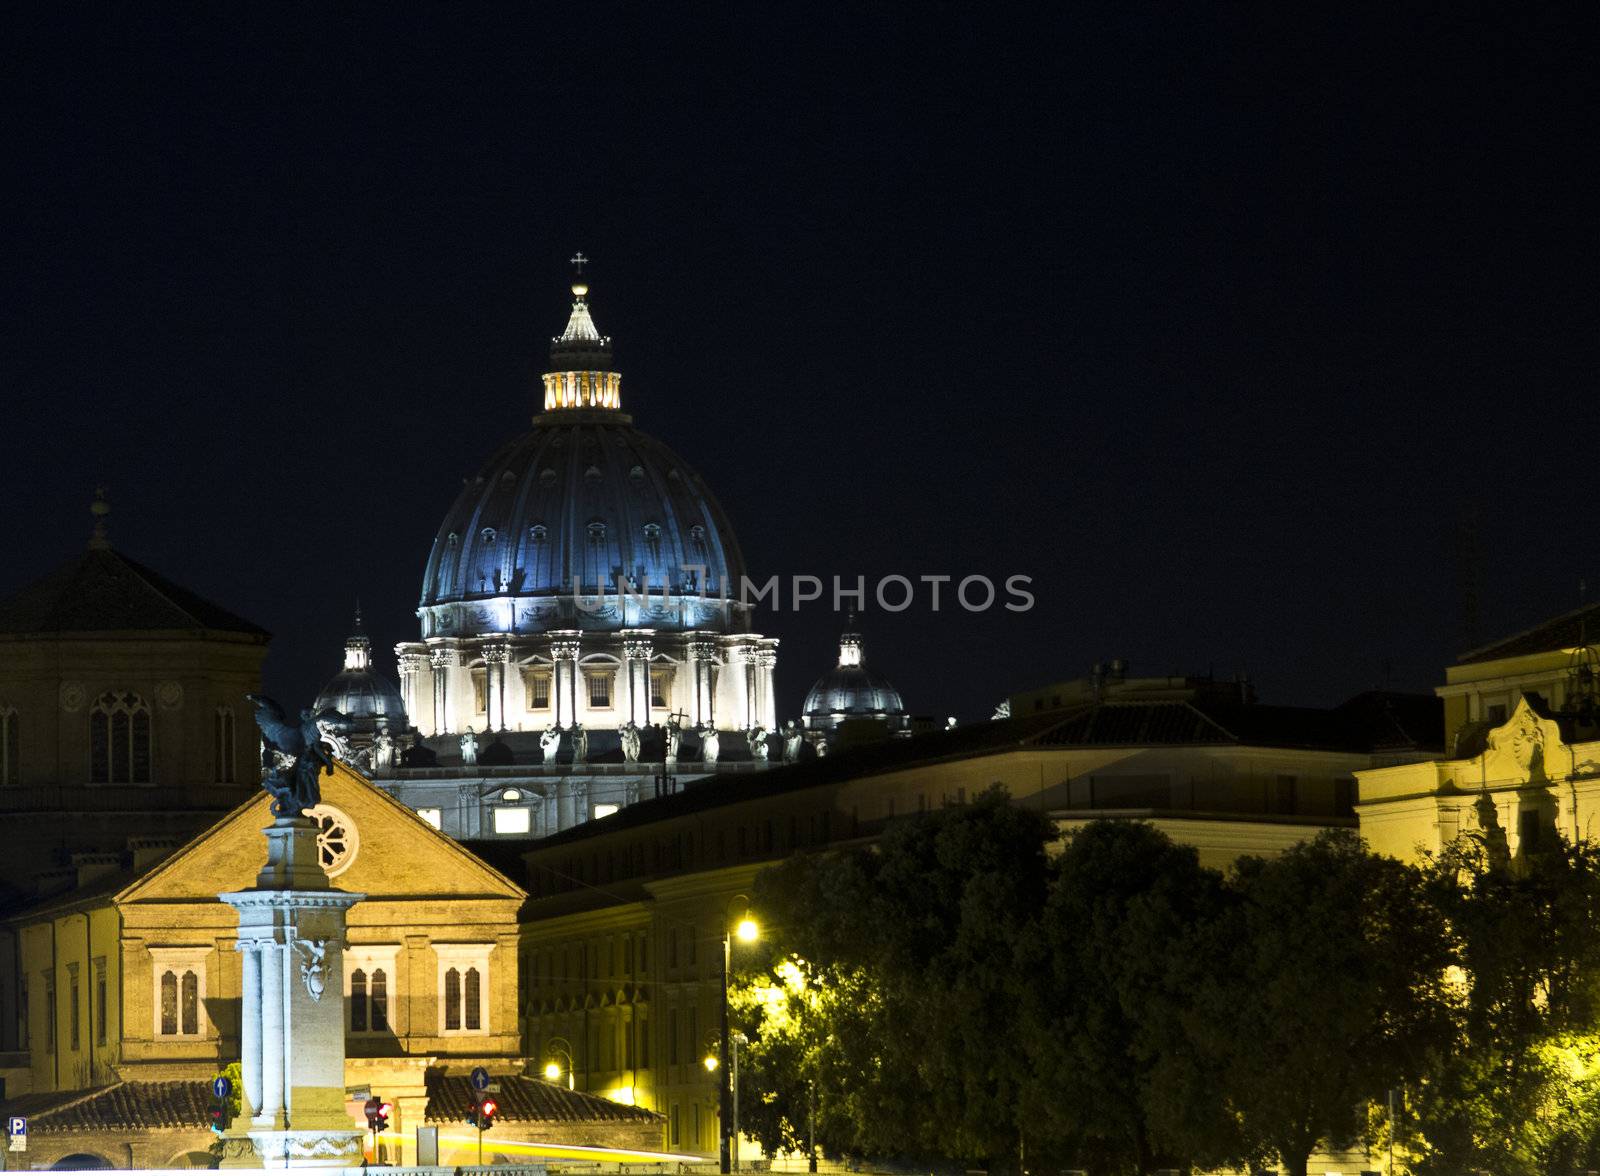 rome by nigth